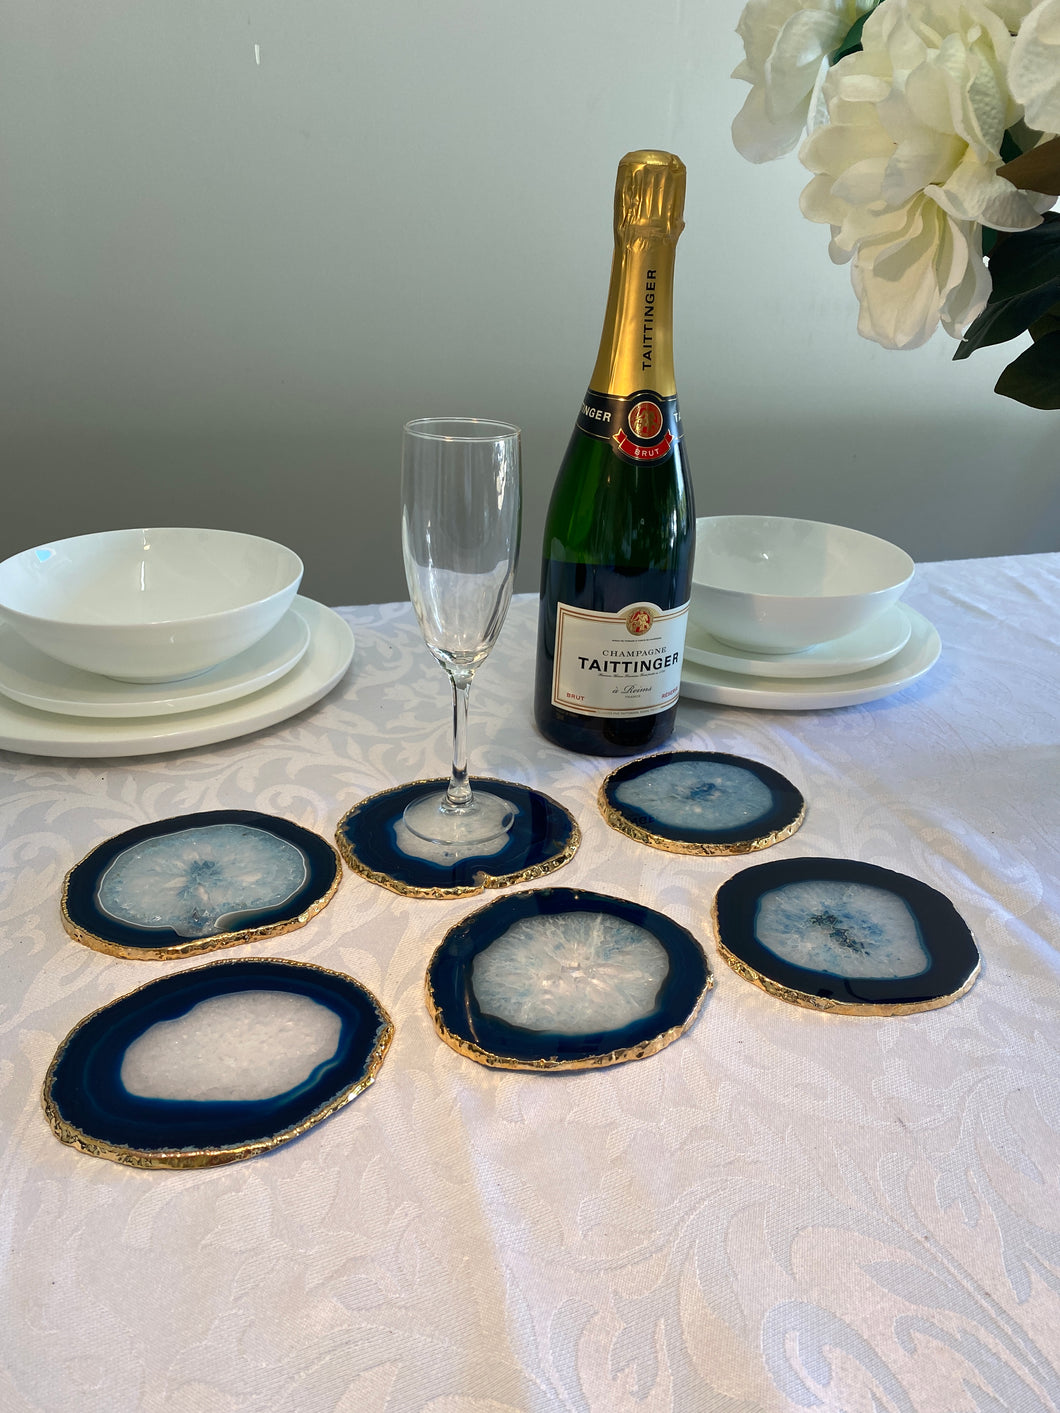 Set of 6 blue polished Agate Slice drink coasters with Gold Electroplating around the edges